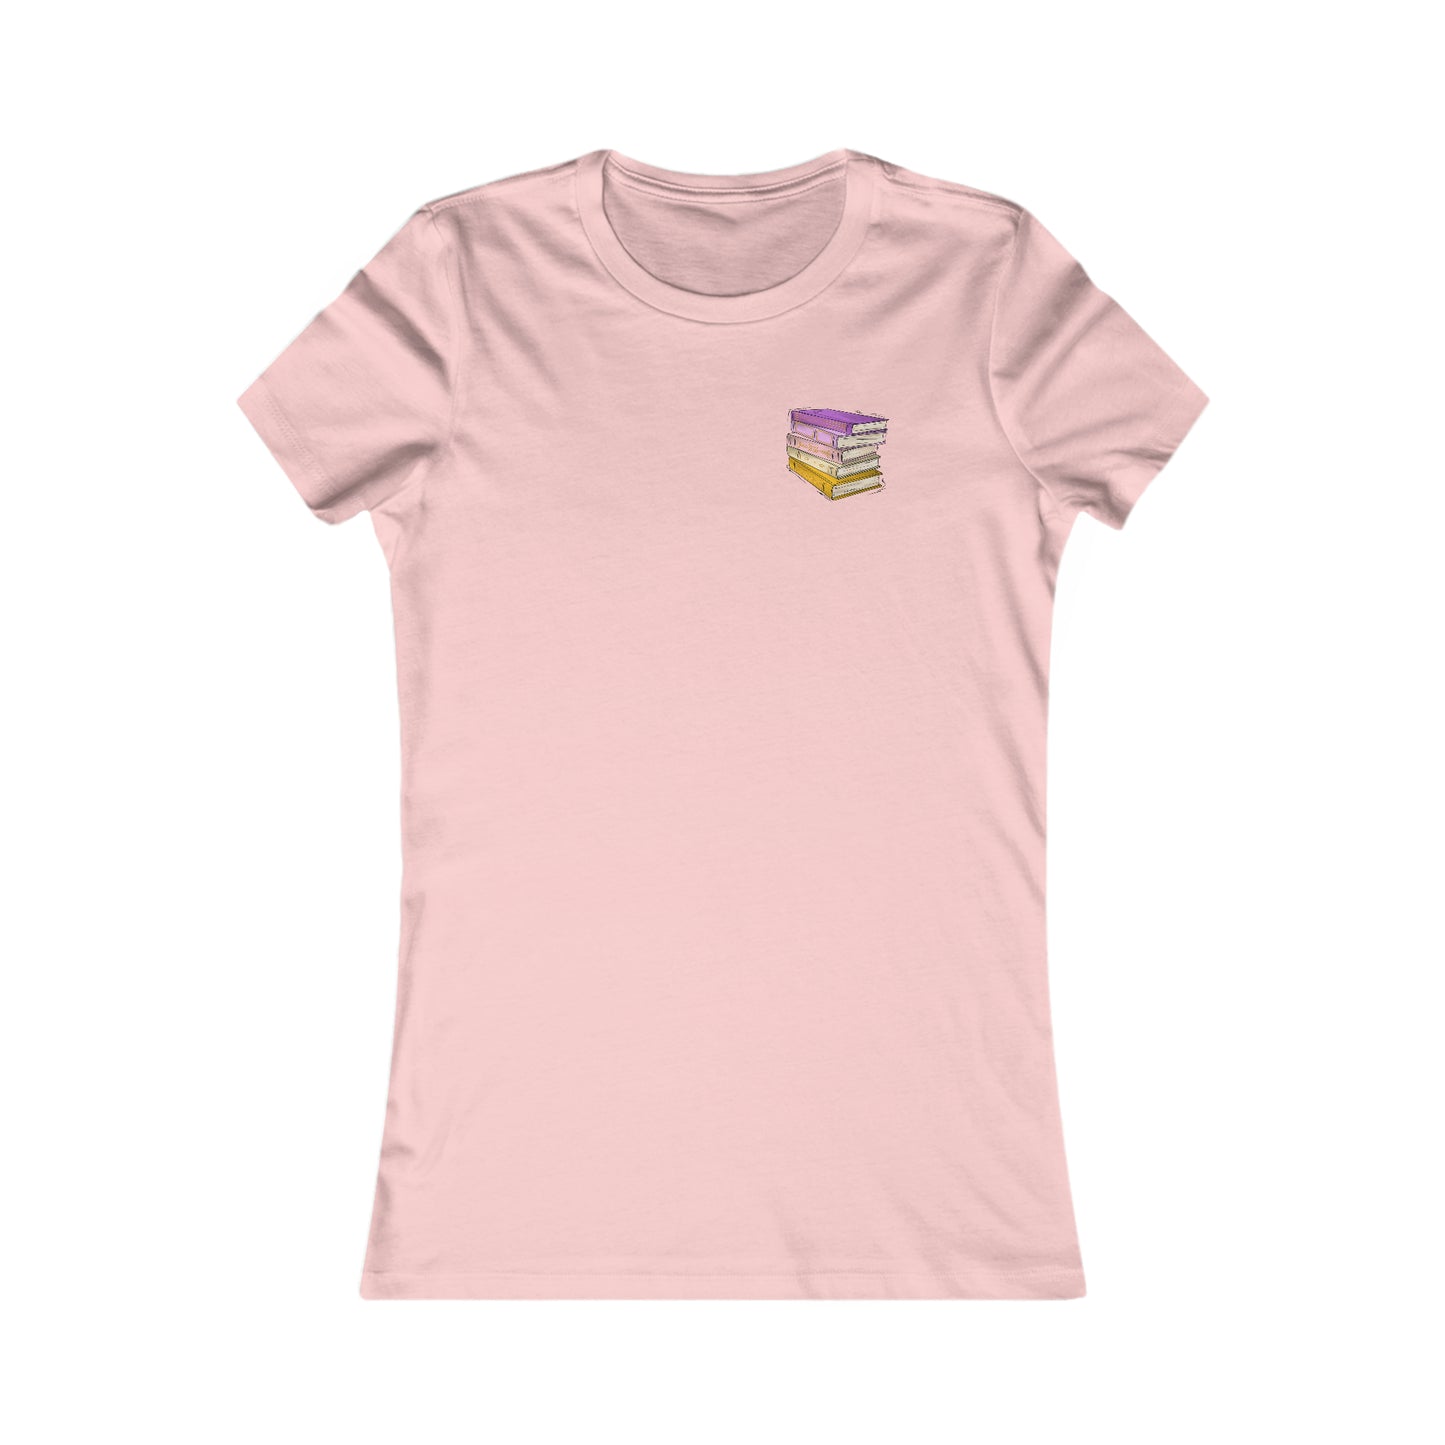 Trixic Pride Flag Old Books - Women's T-Shirt